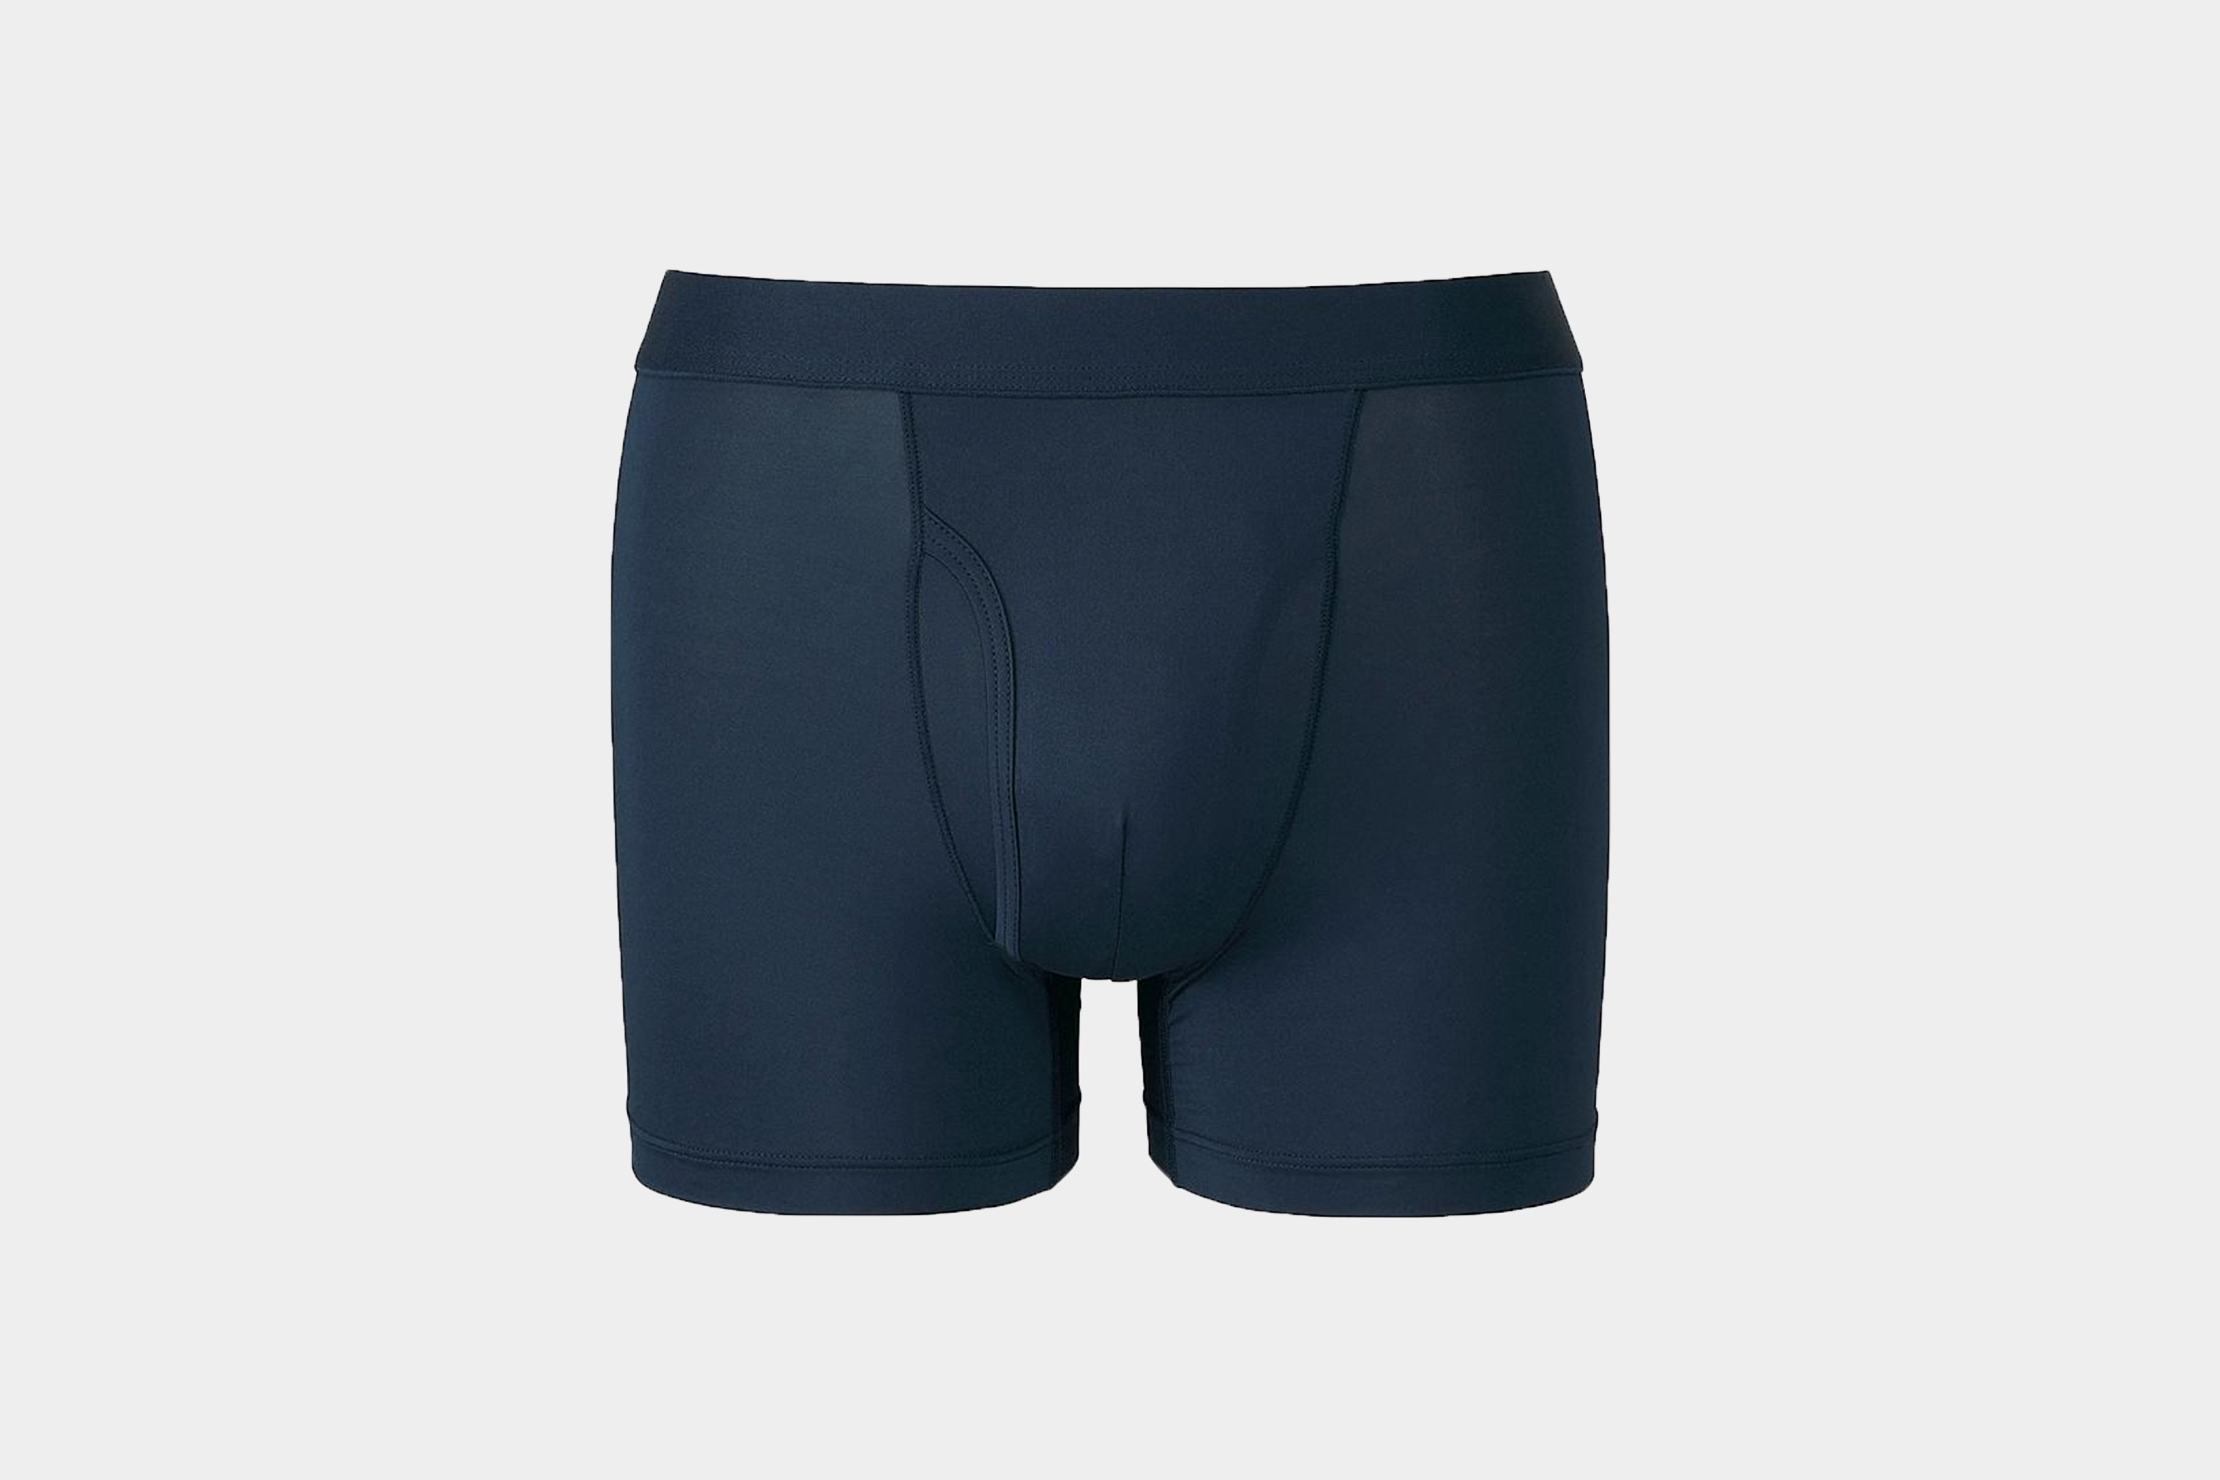 UNIQLO Philippines on X: Looking for underwear with excellent airflow? Get  the ultimate comfort all day with our Men's AIRism Boxer Briefs with  quick-drying DRY technology plus self-deodorizing and  anti-microbial/anti-odor properties. More